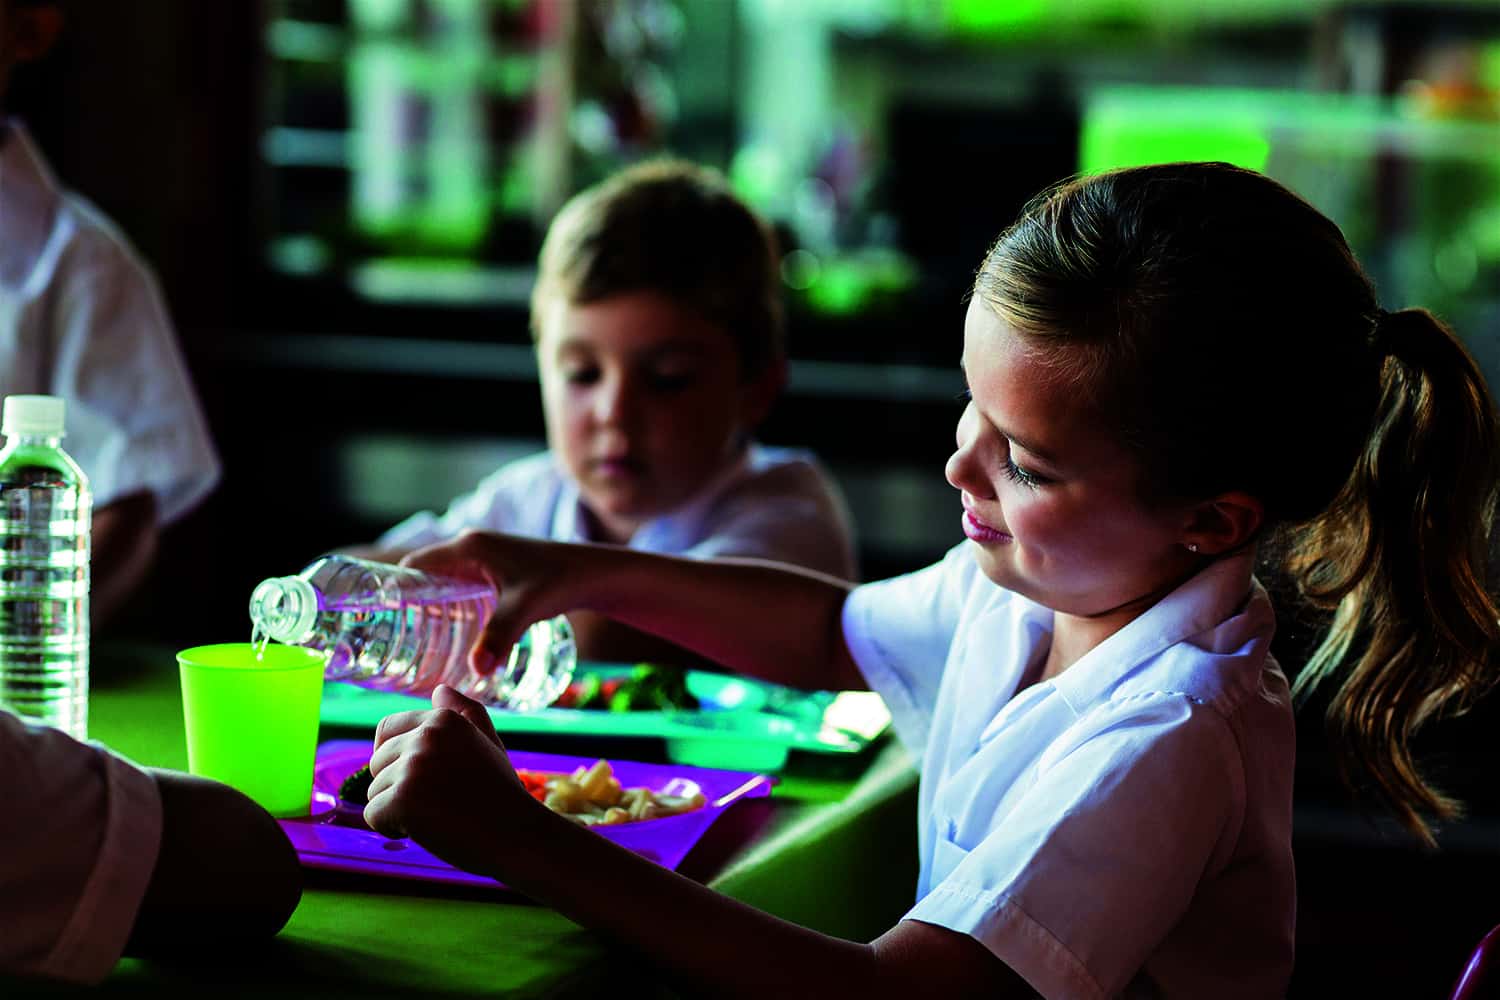 Young girl and boy eating school dinner off plastic trays.